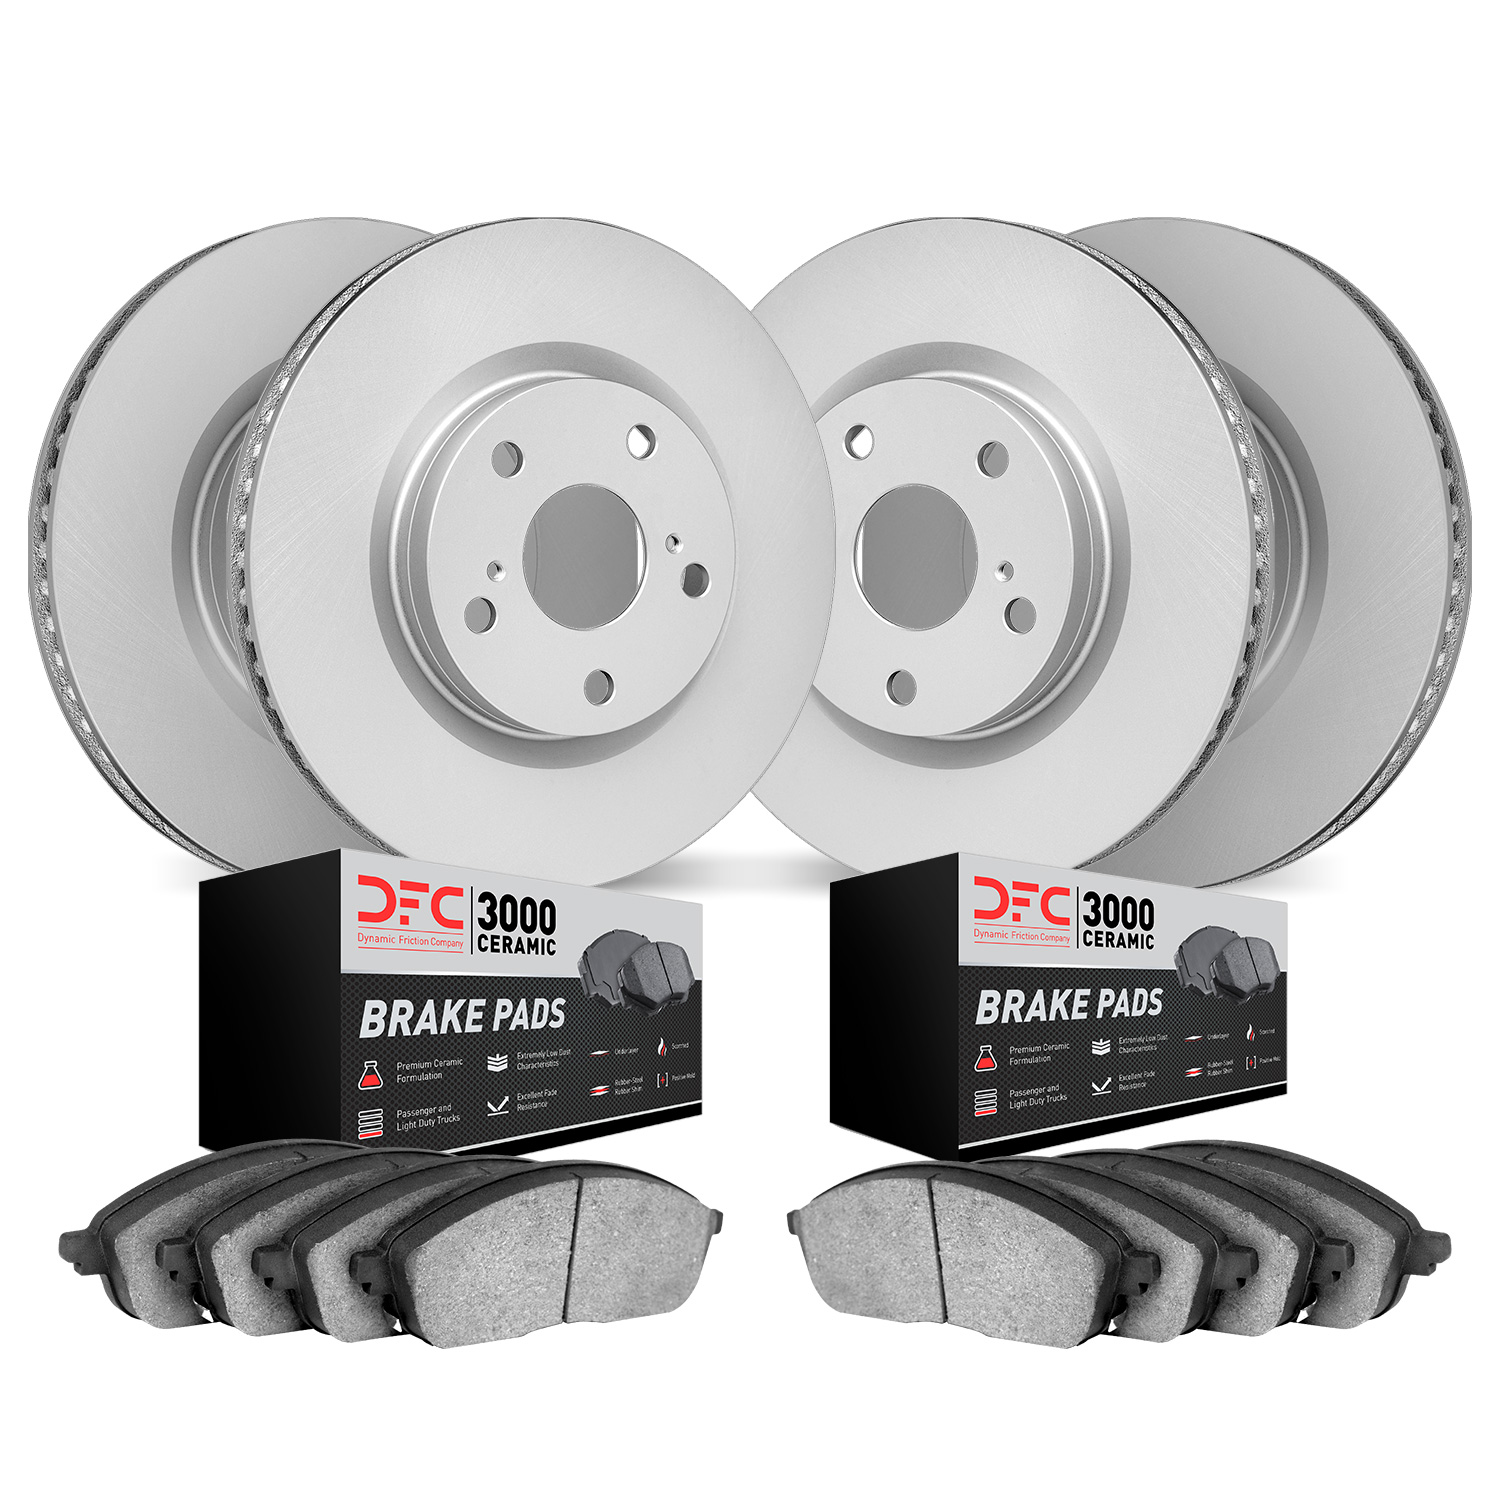 4304-31033 Geospec Brake Rotors with 3000-Series Ceramic Brake Pads Kit, 2007-2015 BMW, Position: Front and Rear